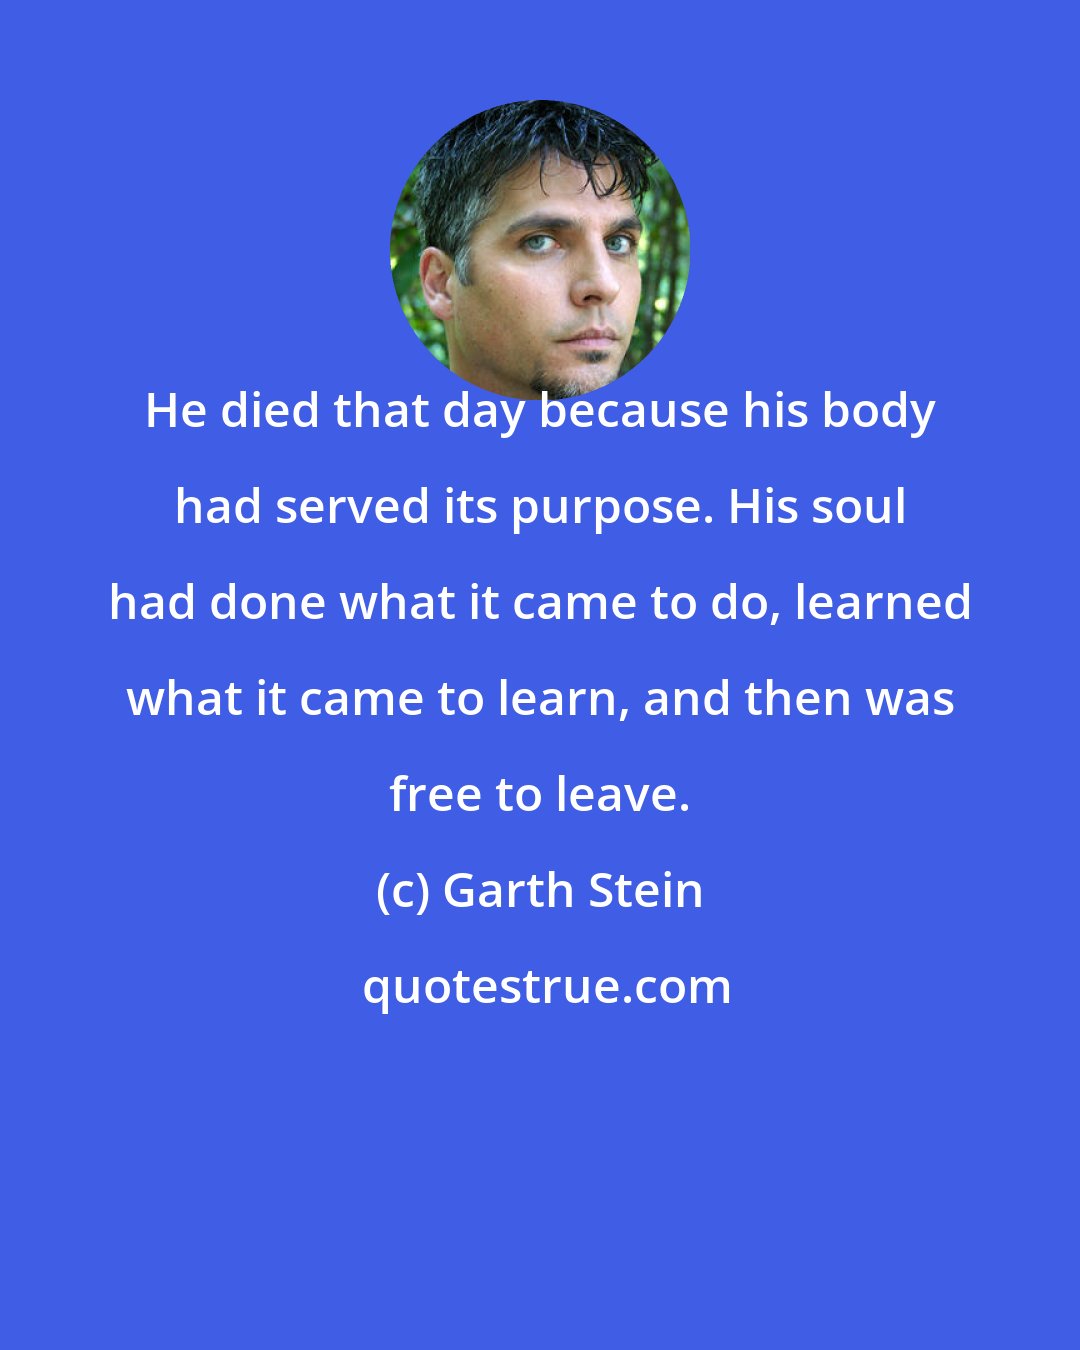 Garth Stein: He died that day because his body had served its purpose. His soul had done what it came to do, learned what it came to learn, and then was free to leave.